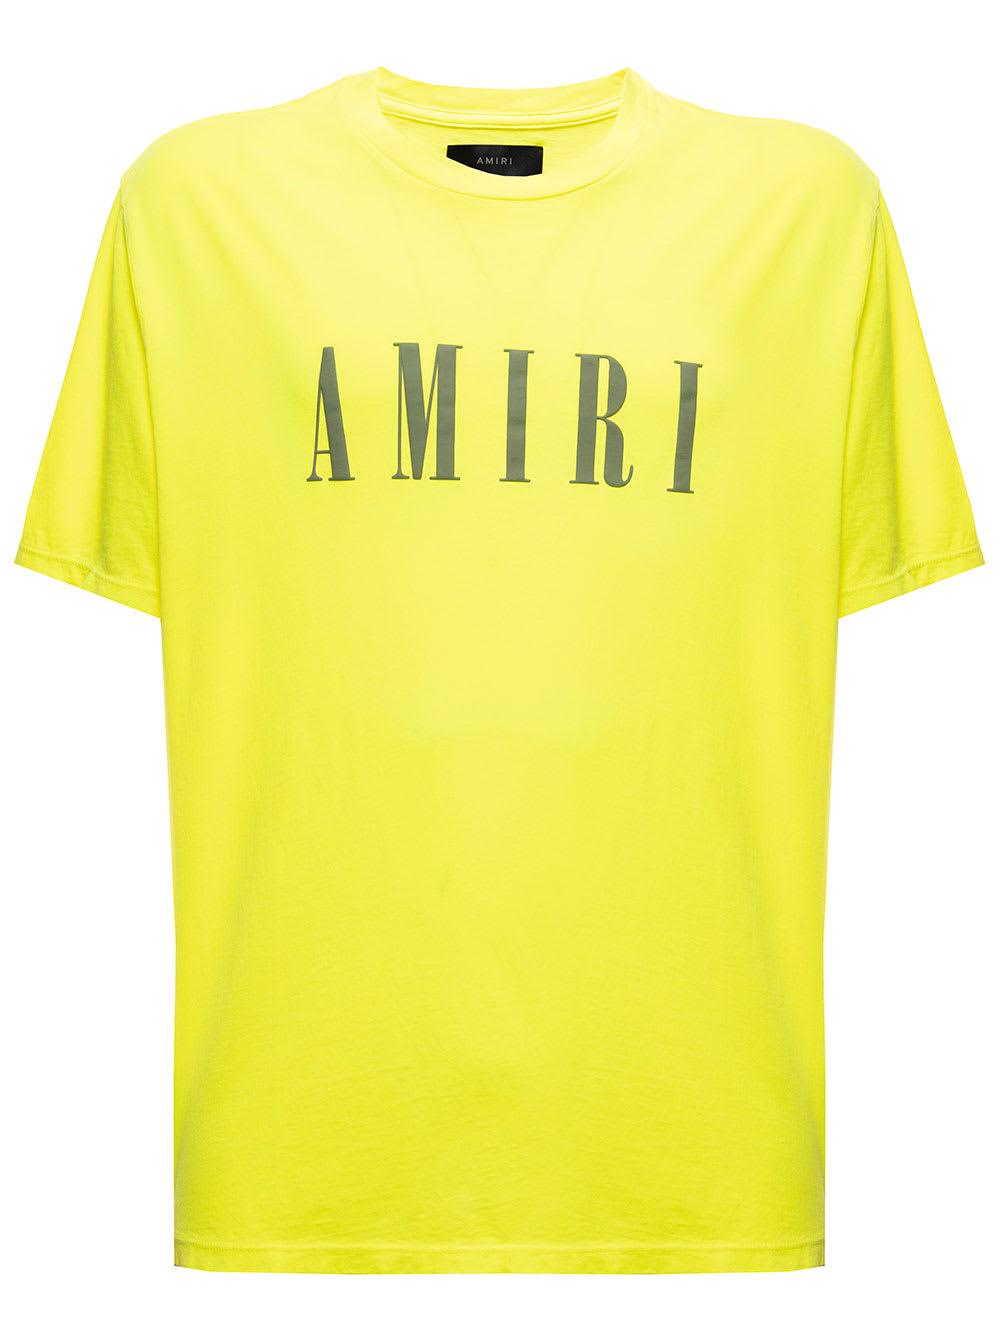 AMIRI Neon Yellow T-shirt In Jersey With Contrasting Core Logo Print To The Chest Amiri Man